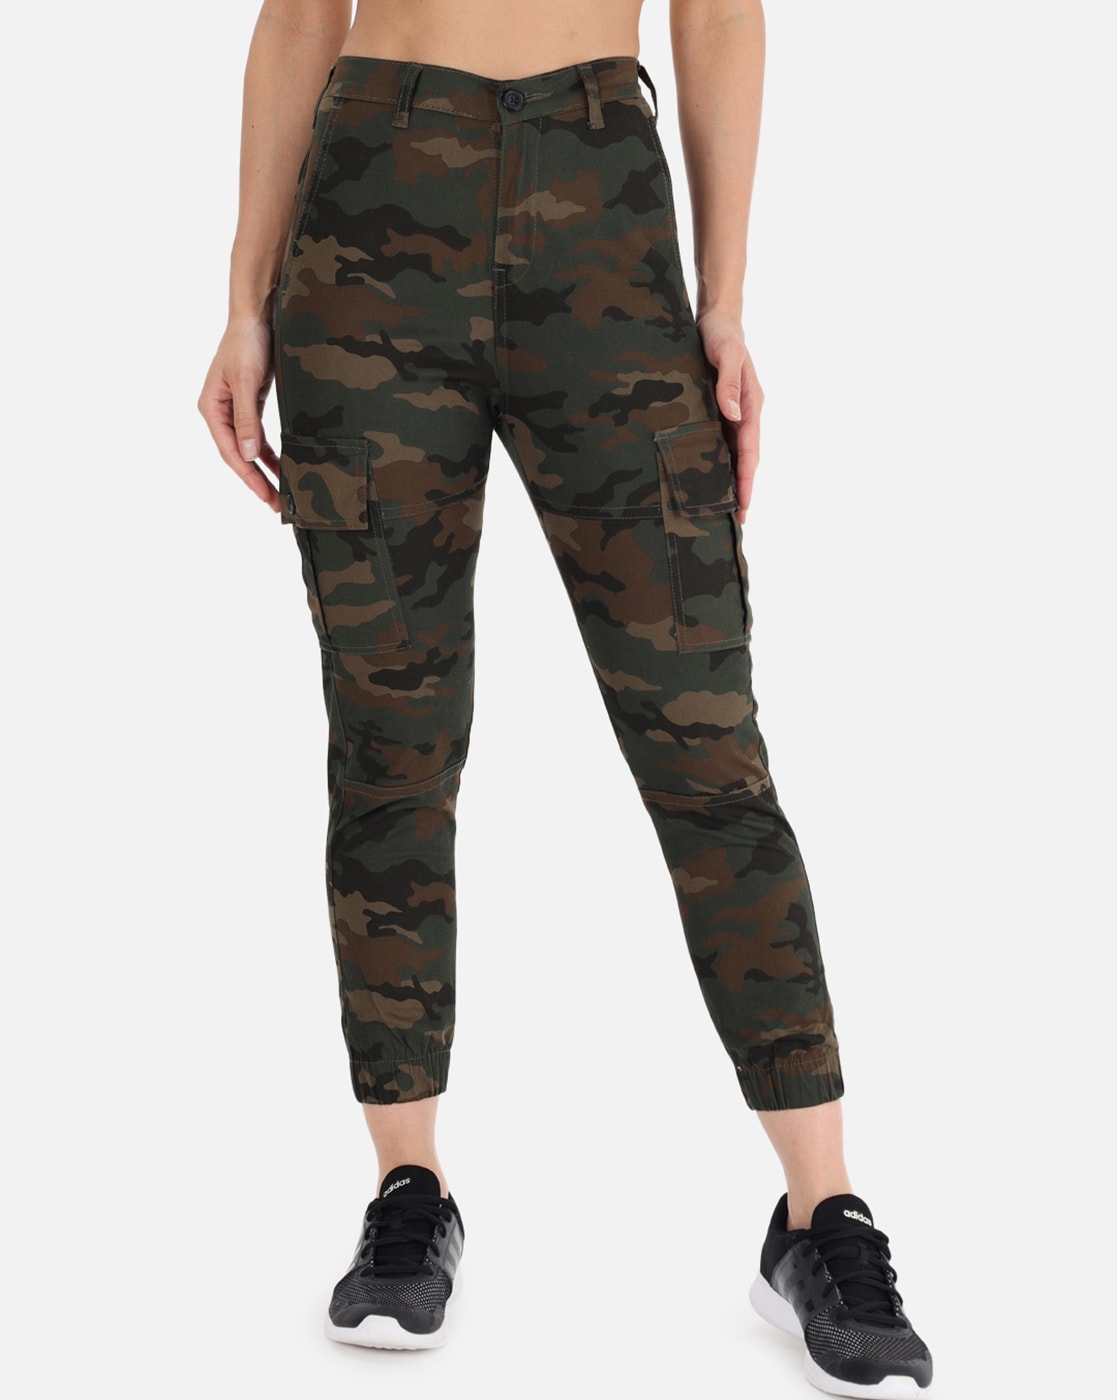 Imported Lycra Women Army pant Size free size up to 34